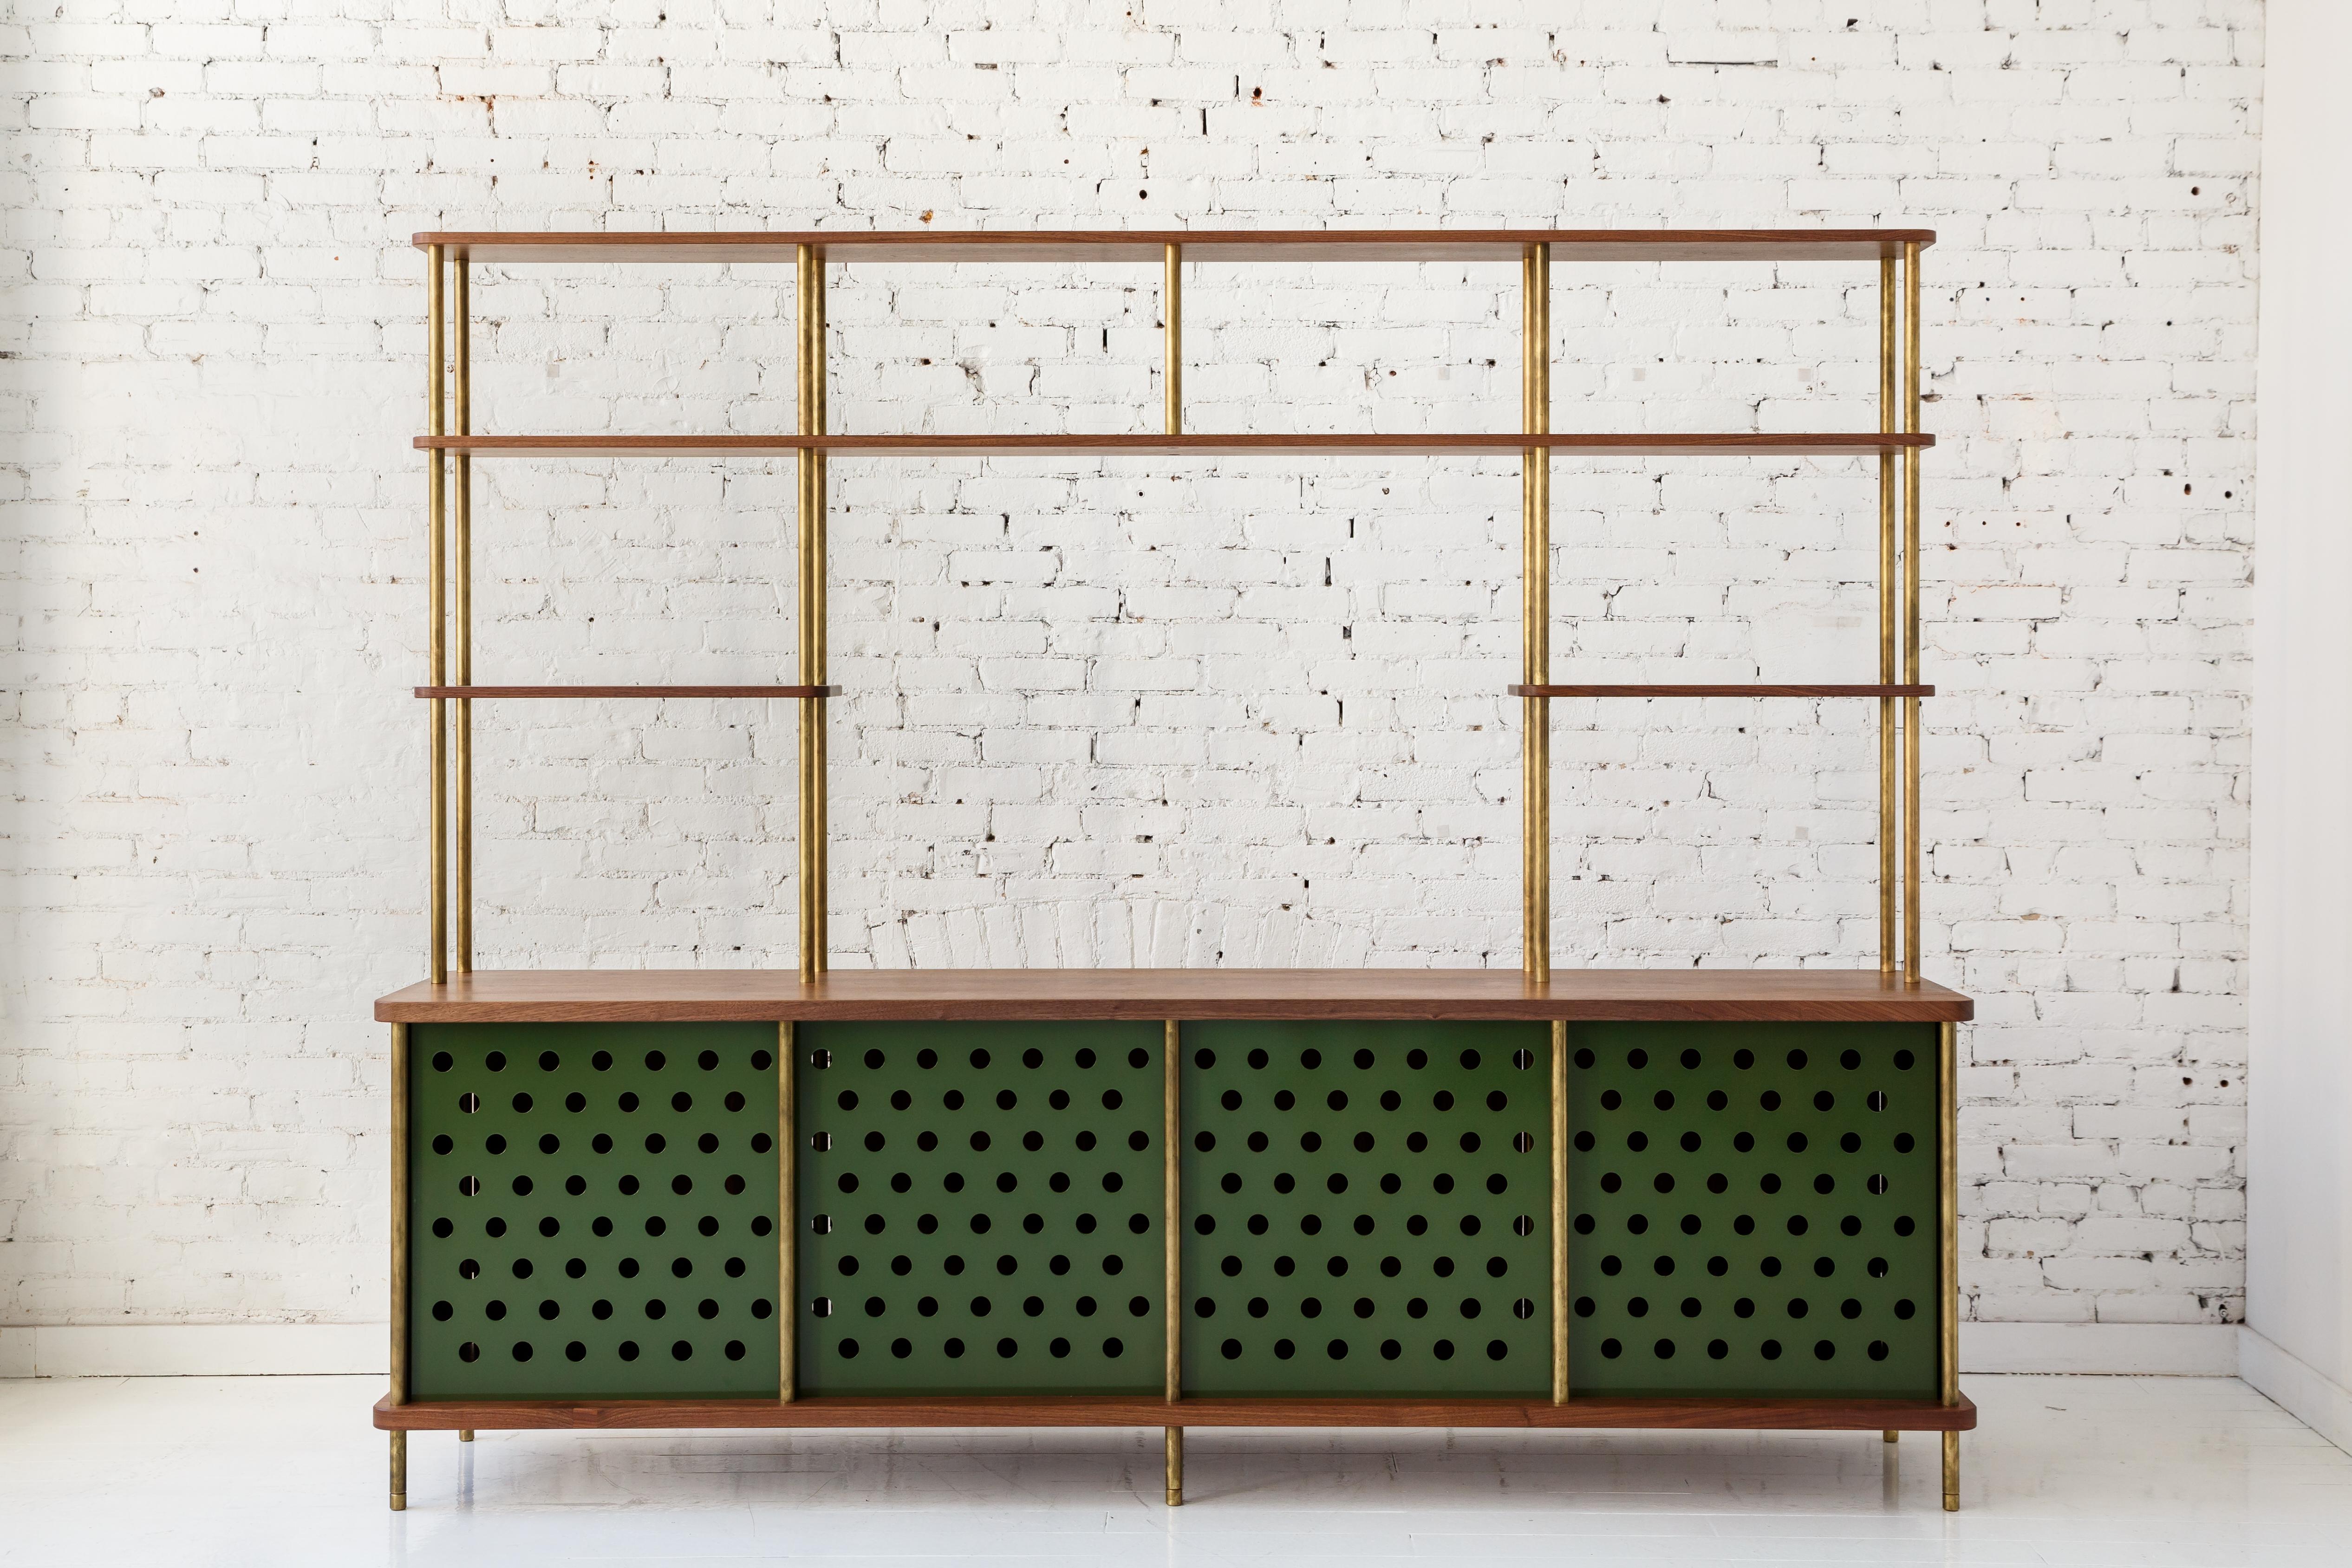 Consistent with the Strata collection, the new Strata Credenza is designed to be modular in order to create versatile configurations tailored to your needs. Immediately available as shown with brass rods, walnut shelving and four powder coated